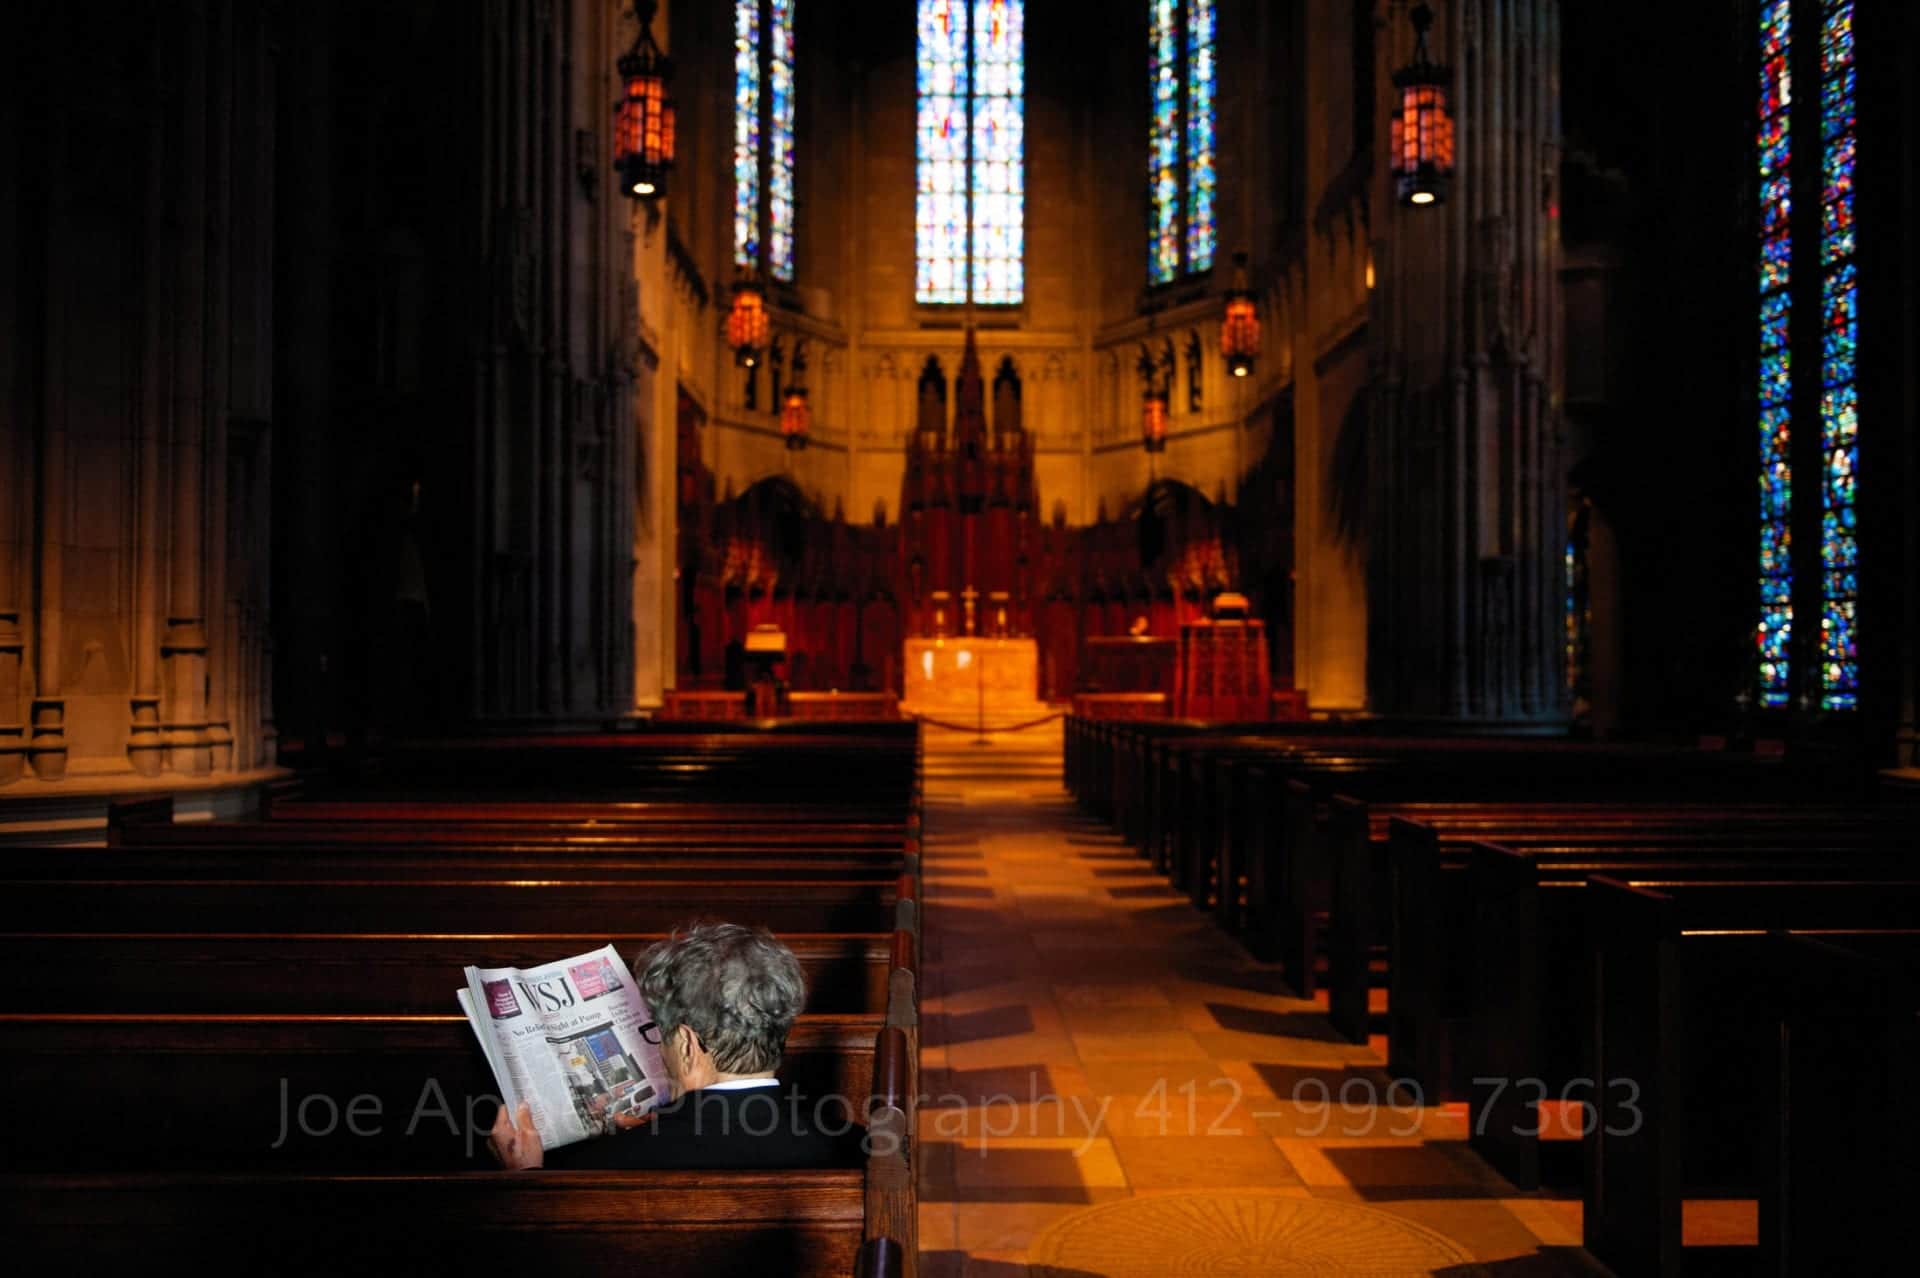 golden light illuminates the altar and interior of heinz memorial chapel as an older man sits in the sunlight in the last pew reading the wall street journal